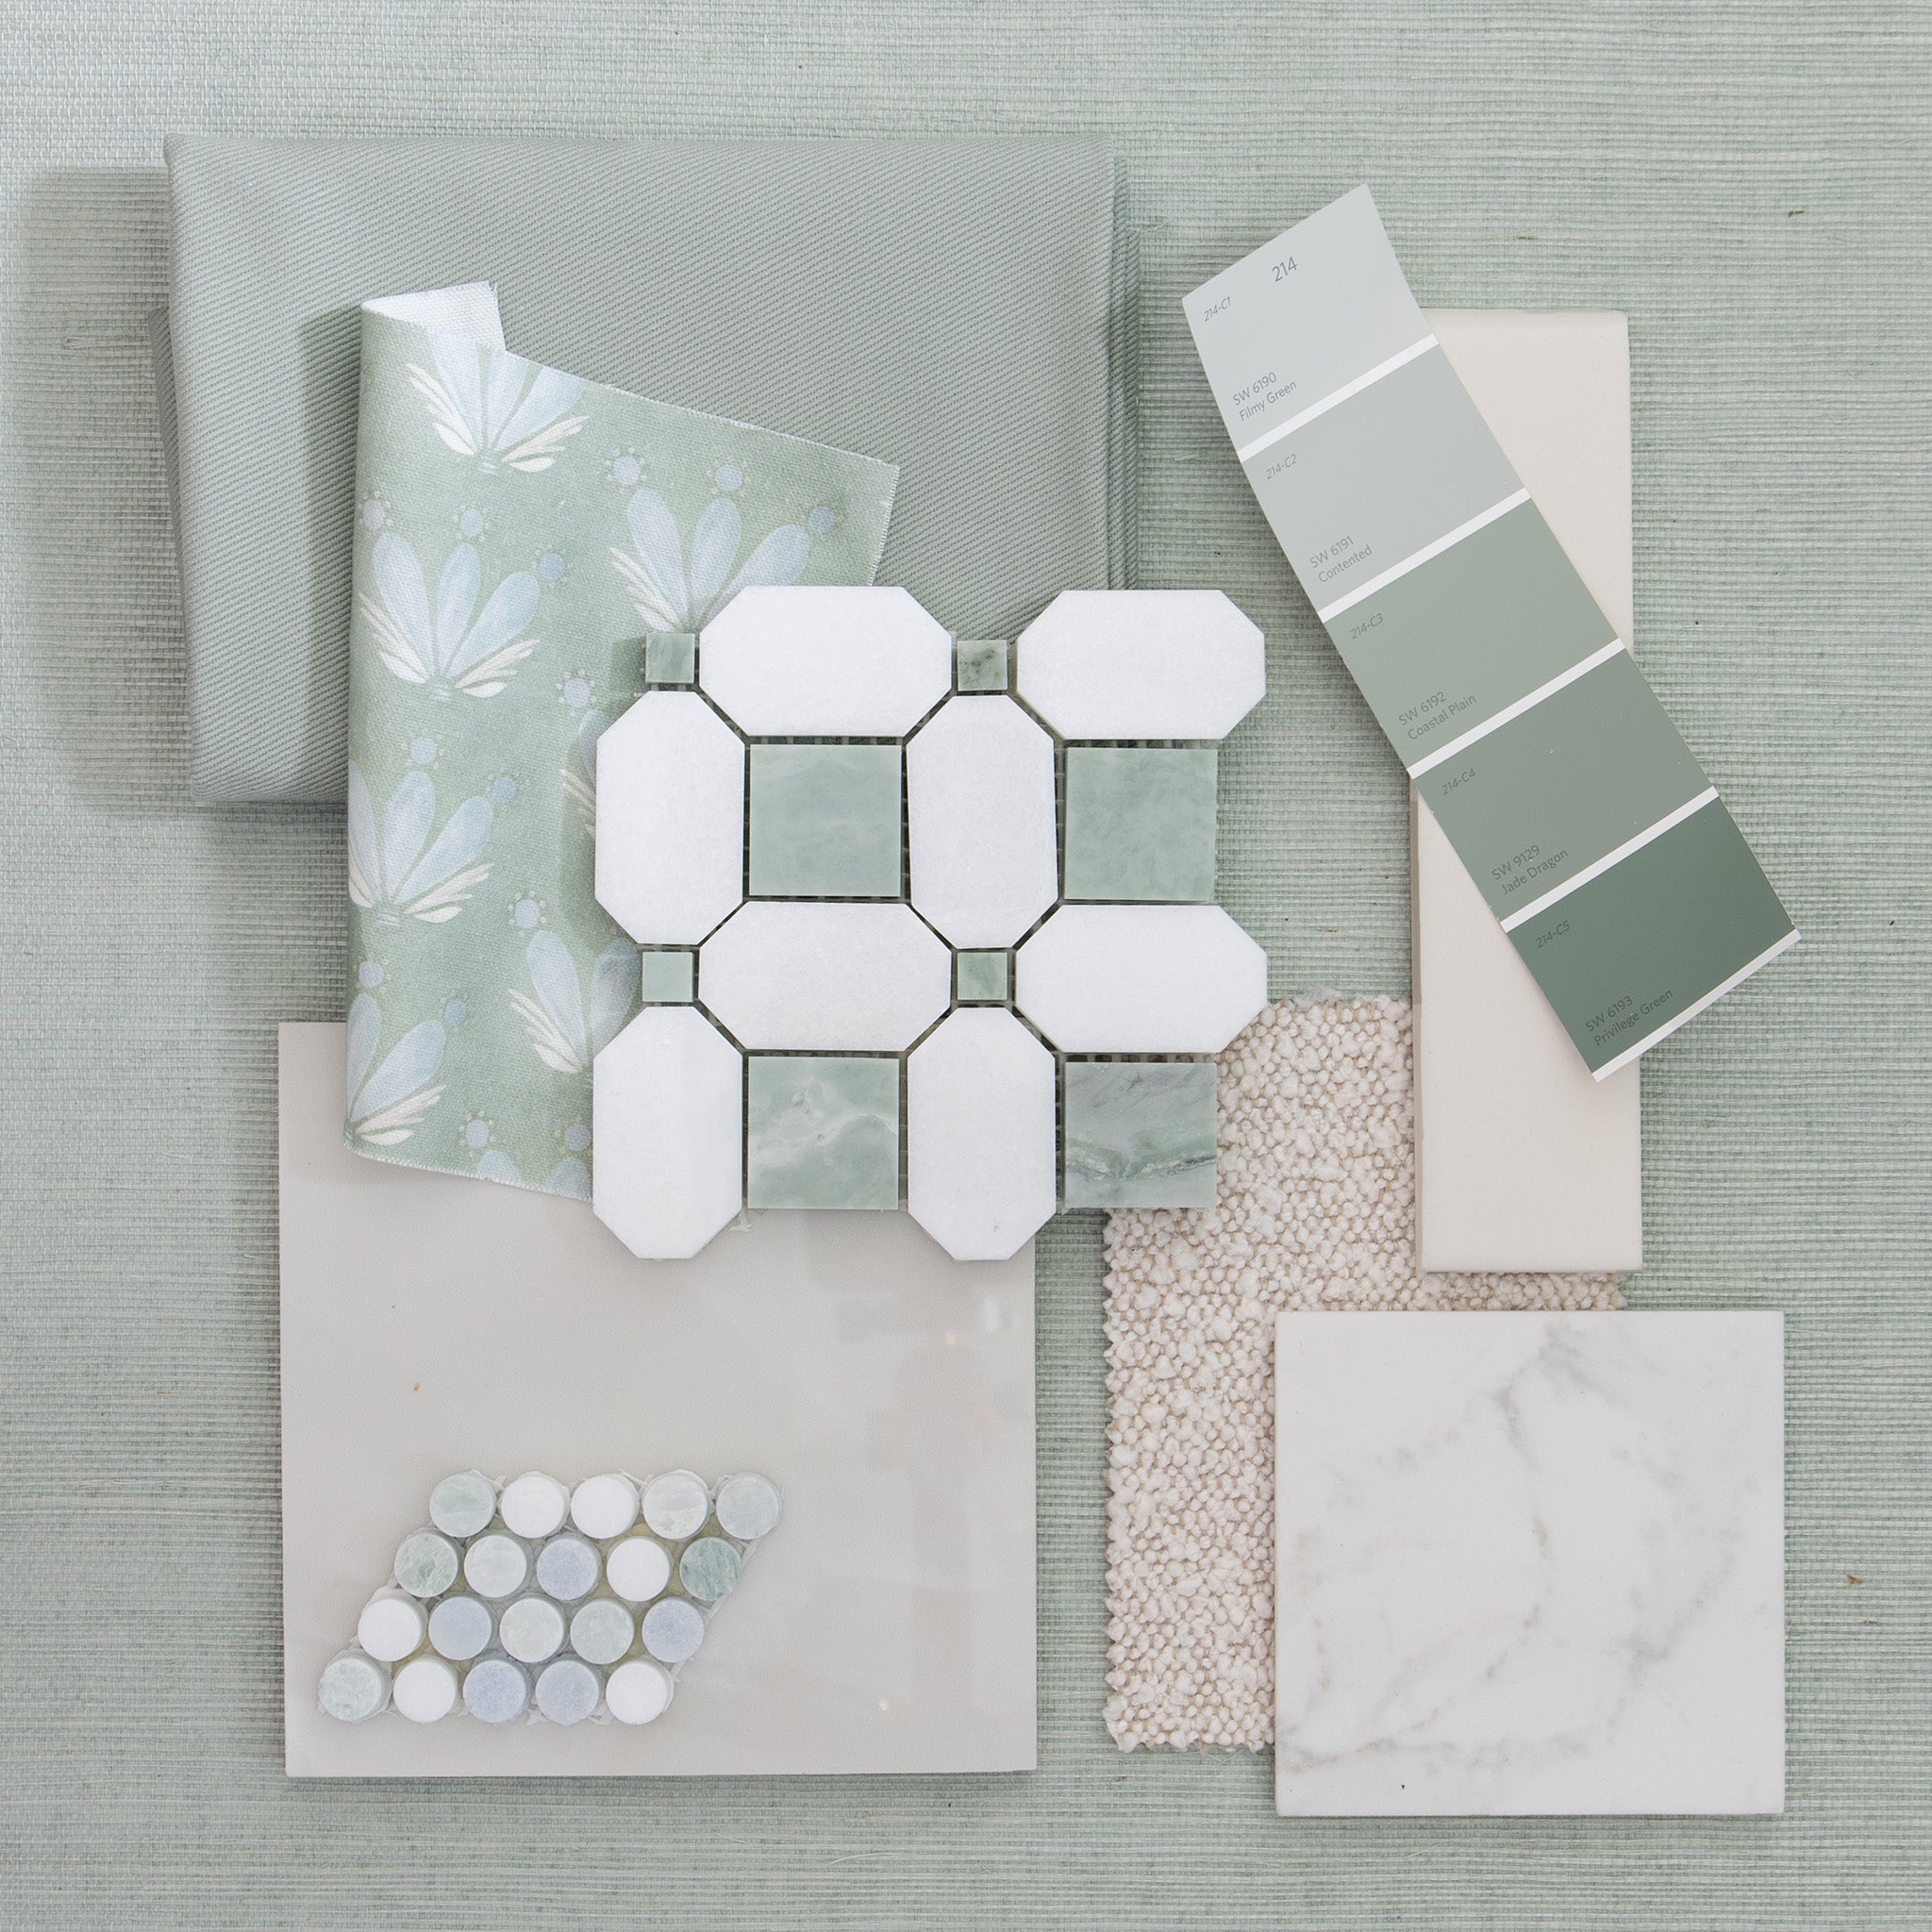 interior design moodboard and wallpaper inspirations with green paint and tile on top